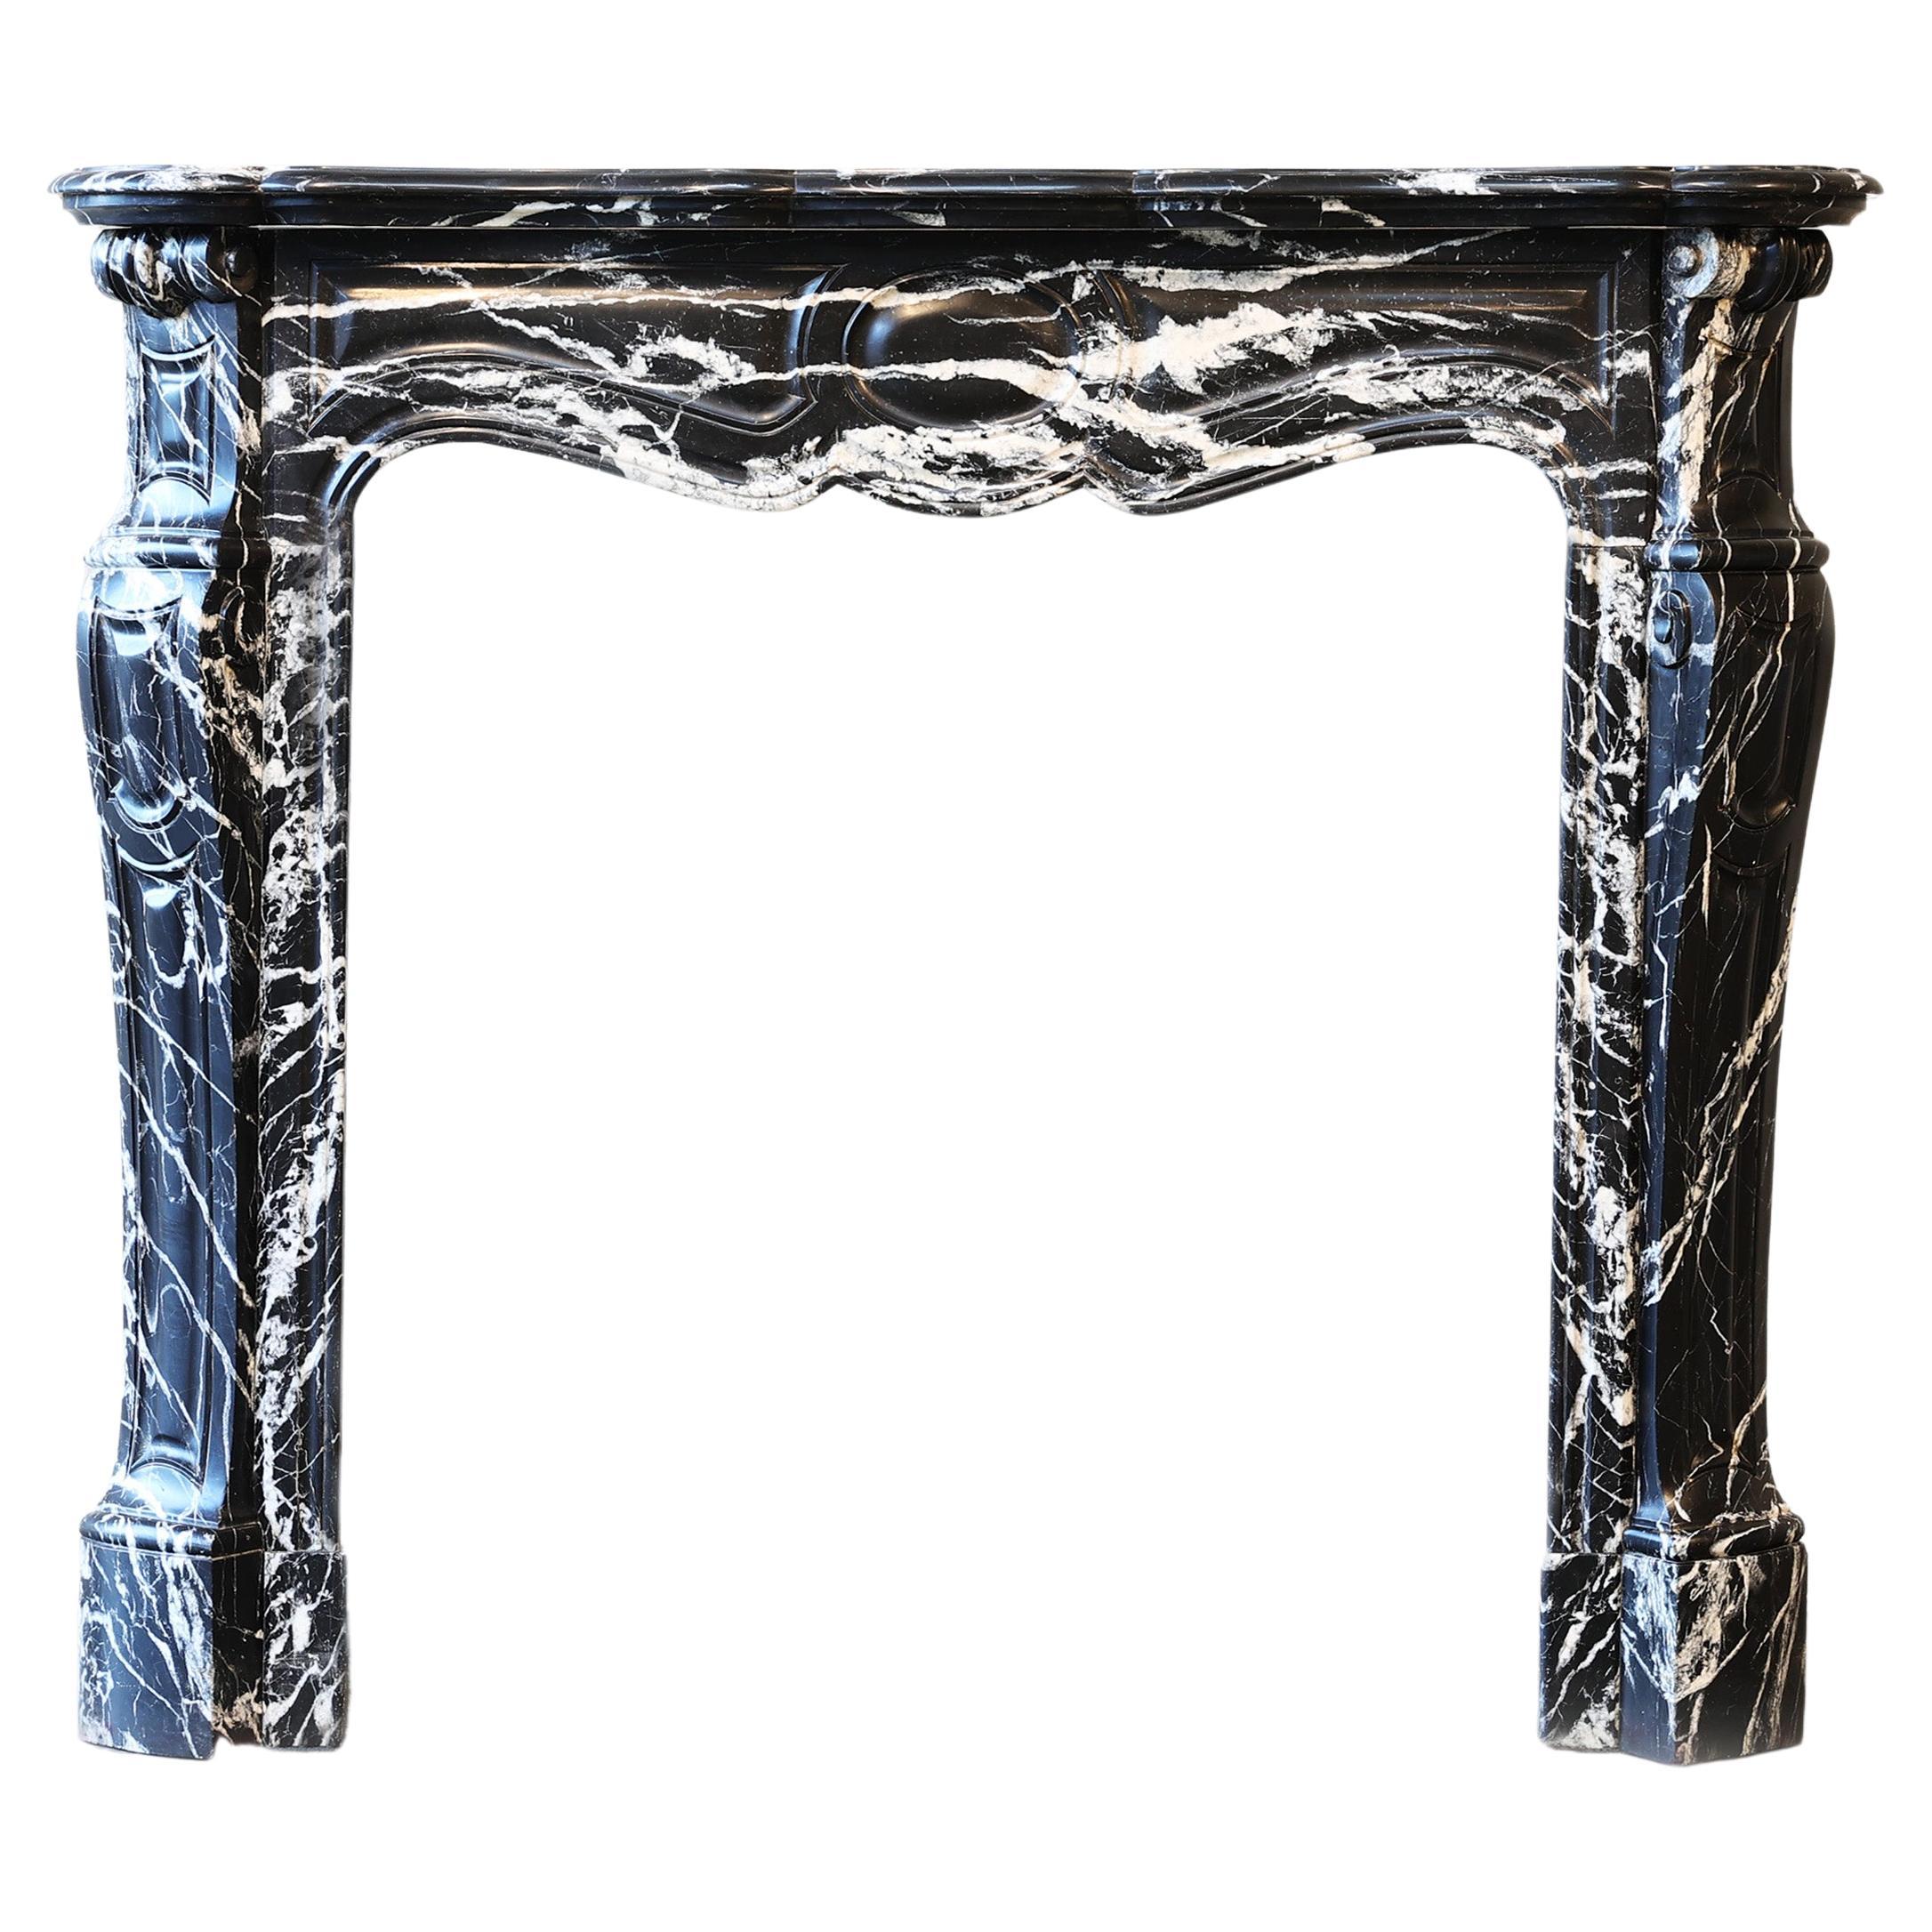 Antique Marble Fireplace Surround  19th Century  Nero Marquina Marble